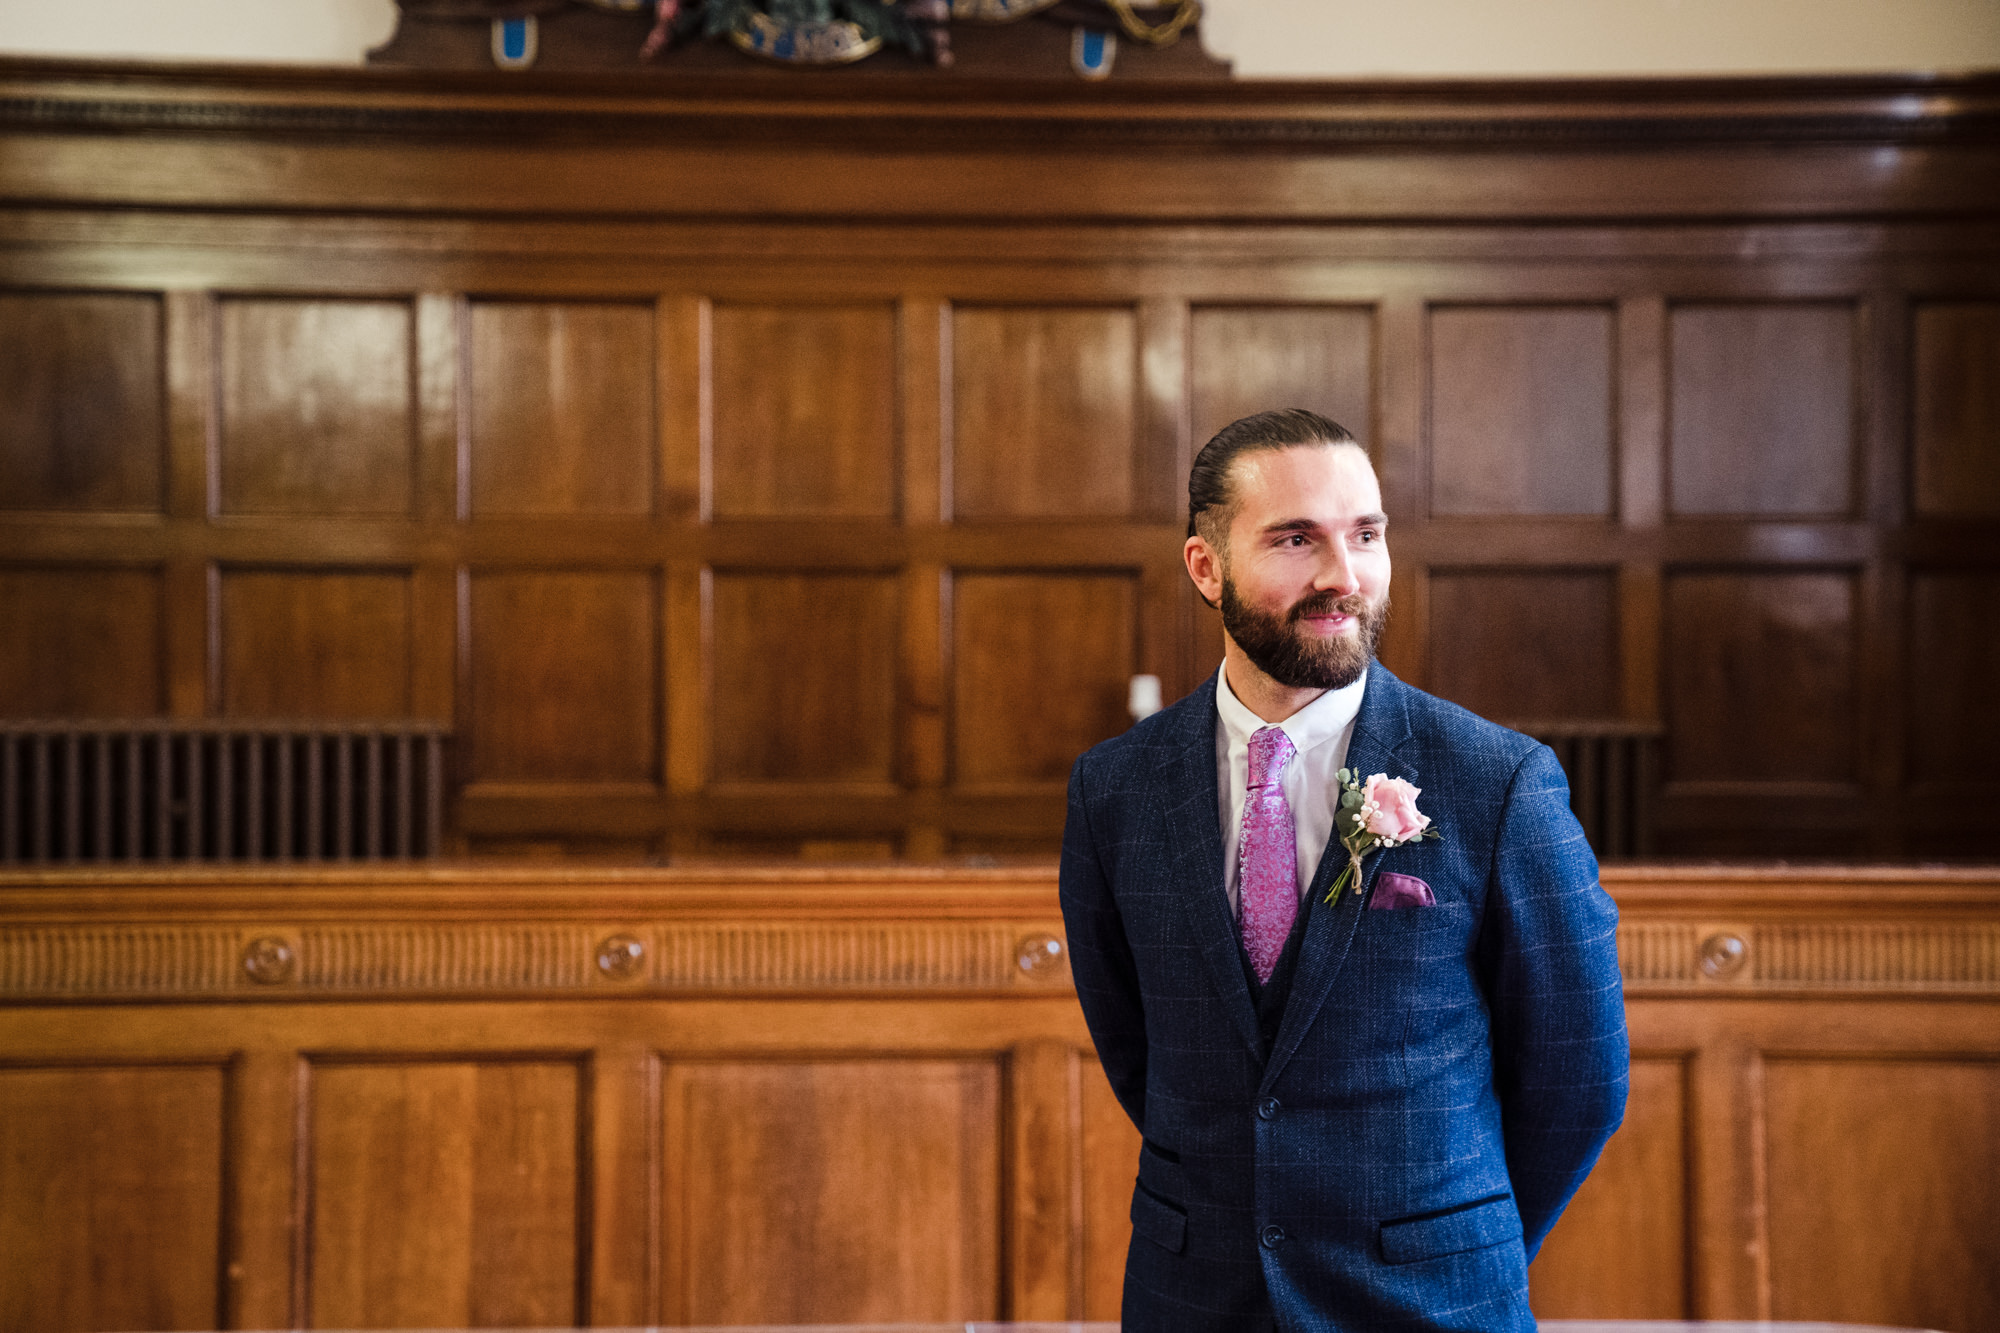 groom waits inside ceremony room at bath guildhall looking over at guests